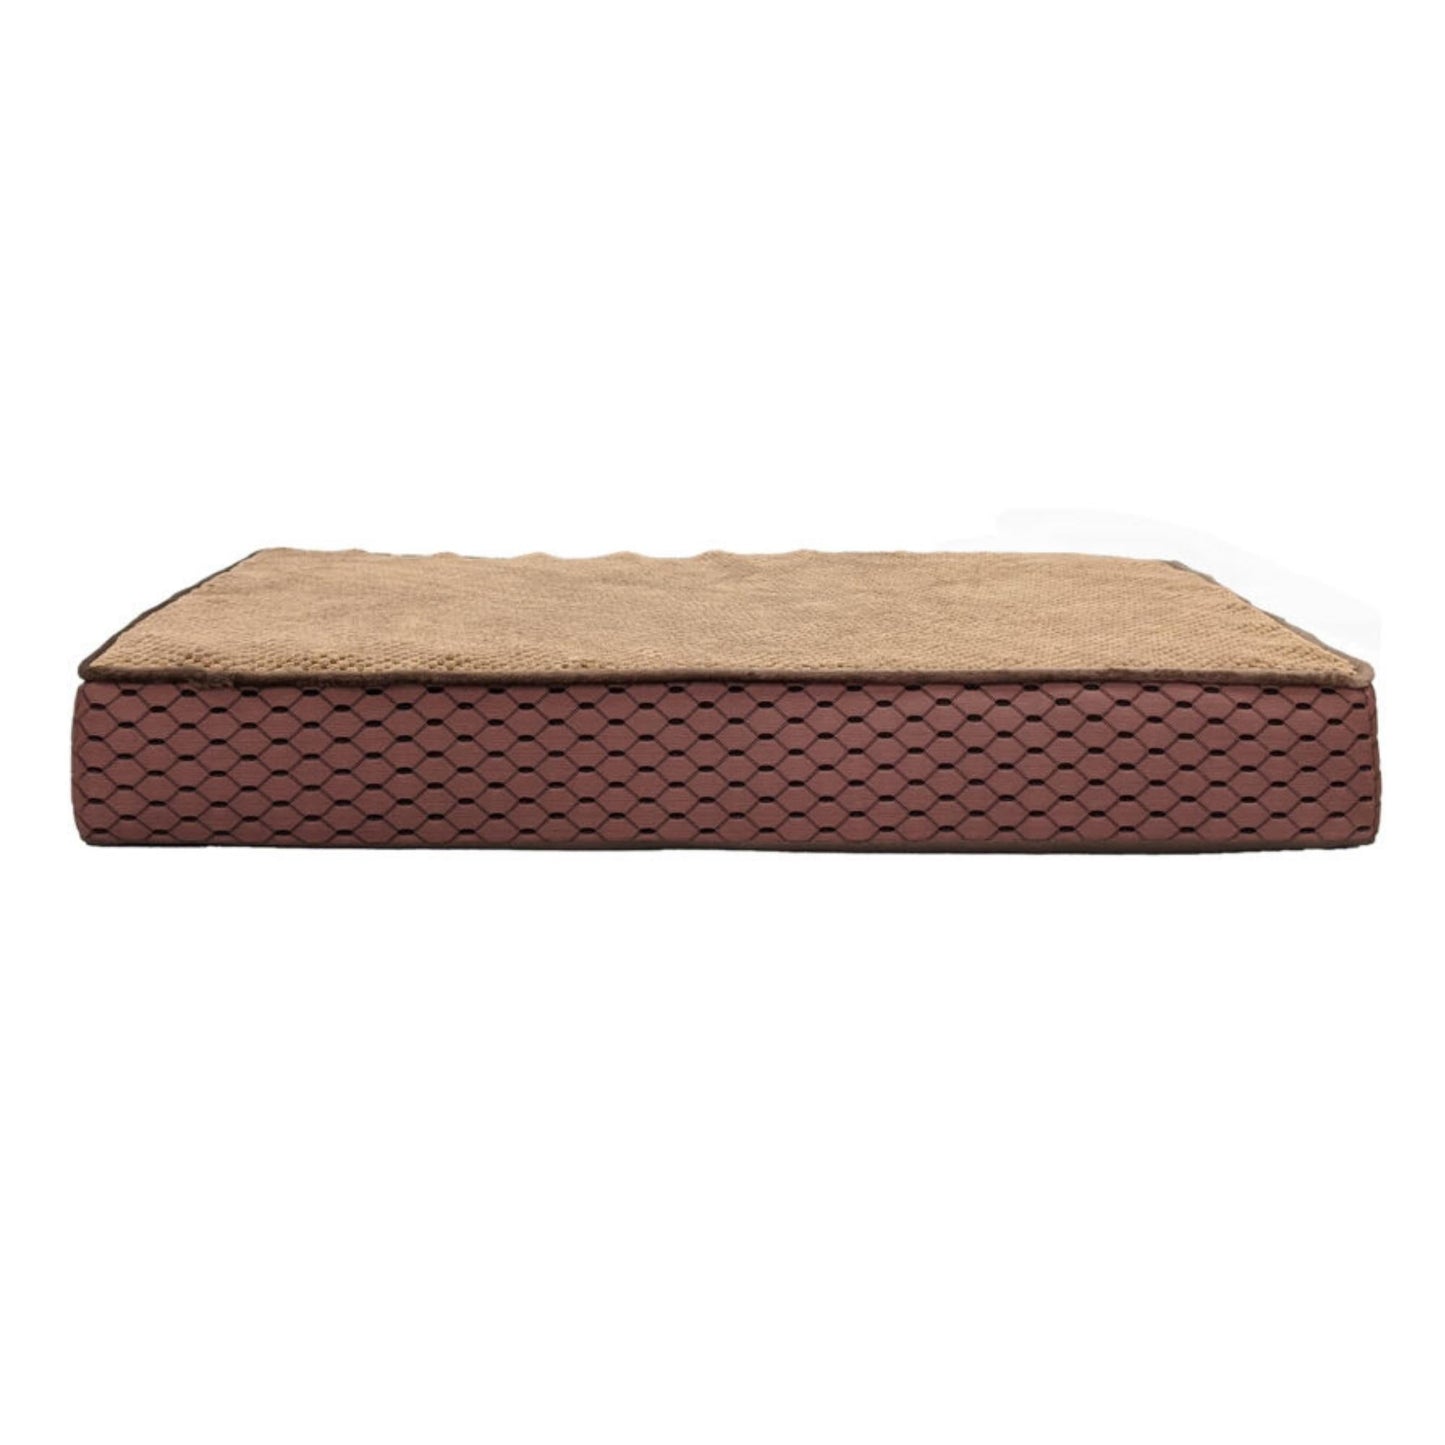 Ethical Pet Sleep Zone Bamboo Bed 35" Brown